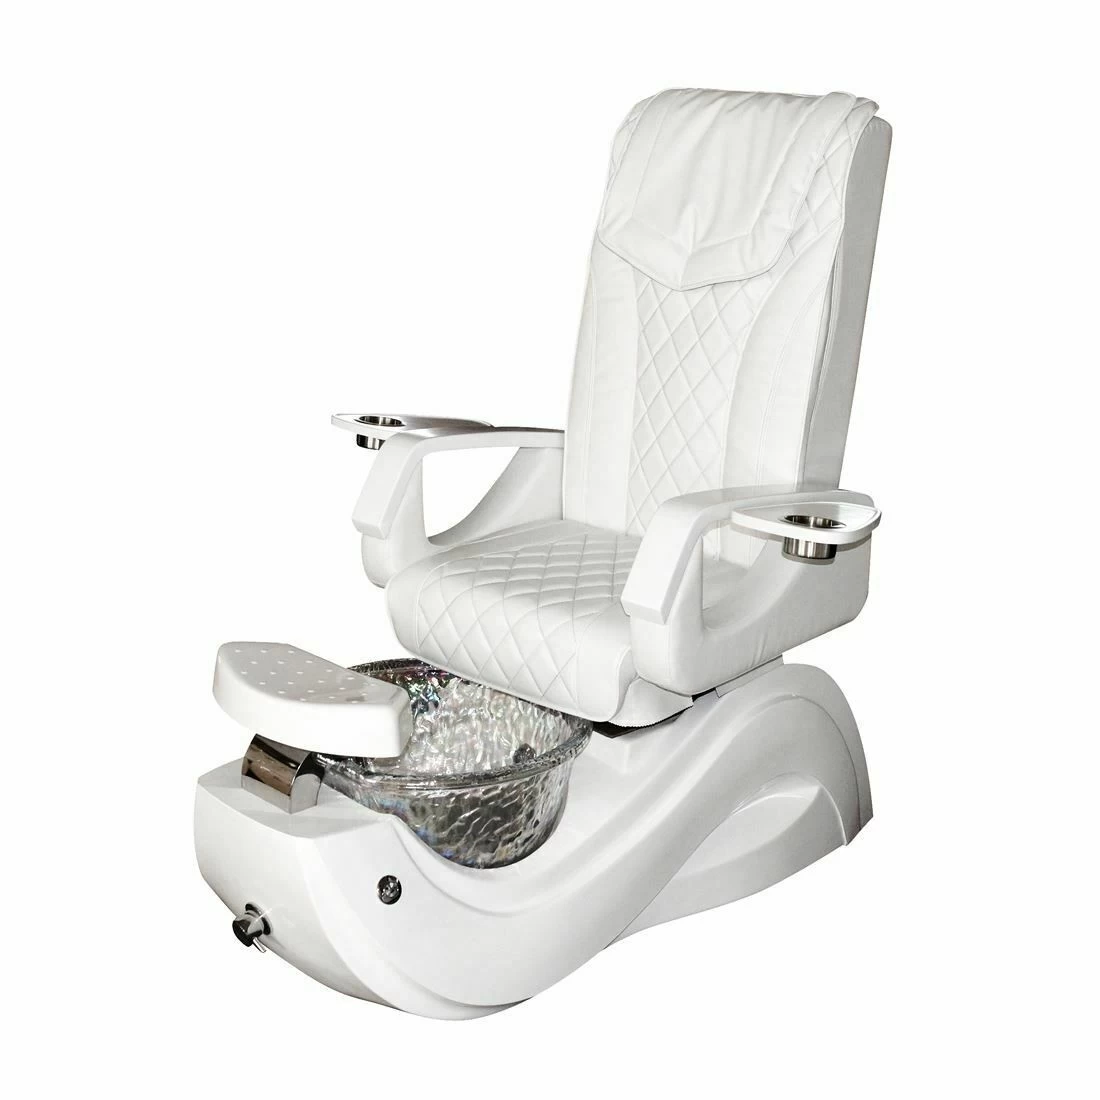 pedicure chair modern white manicure pedicure spa chair pedicure chair faucet china manufacturer DS-S17G